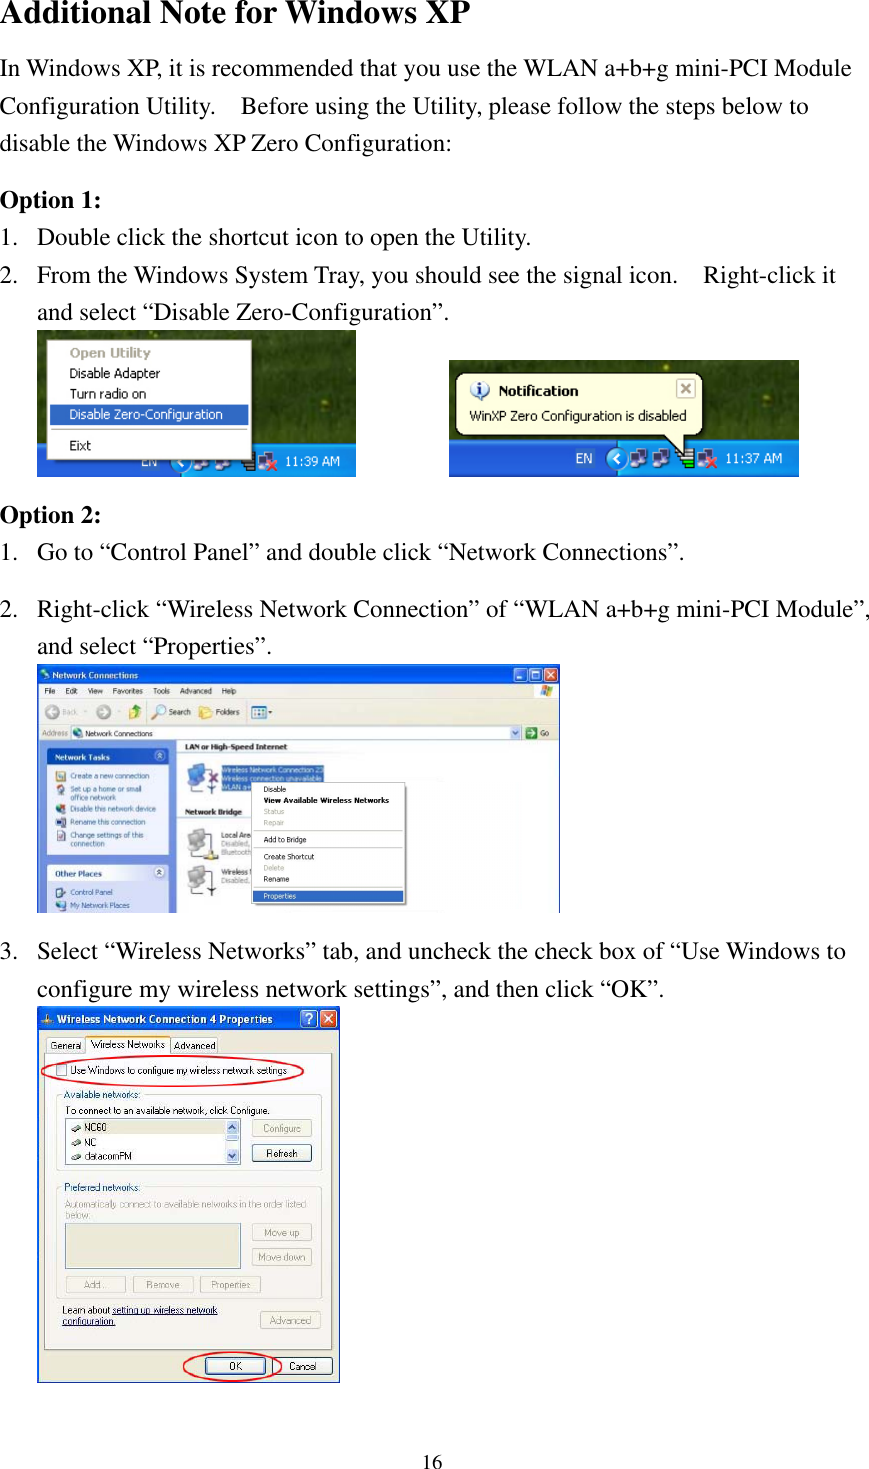  16Additional Note for Windows XP   In Windows XP, it is recommended that you use the WLAN a+b+g mini-PCI Module Configuration Utility.    Before using the Utility, please follow the steps below to disable the Windows XP Zero Configuration:  Option 1: 1. Double click the shortcut icon to open the Utility. 2. From the Windows System Tray, you should see the signal icon.    Right-click it and select “Disable Zero-Configuration”.     Option 2: 1. Go to “Control Panel” and double click “Network Connections”.  2. Right-click “Wireless Network Connection” of “WLAN a+b+g mini-PCI Module”, and select “Properties”.   3. Select “Wireless Networks” tab, and uncheck the check box of “Use Windows to configure my wireless network settings”, and then click “OK”.  